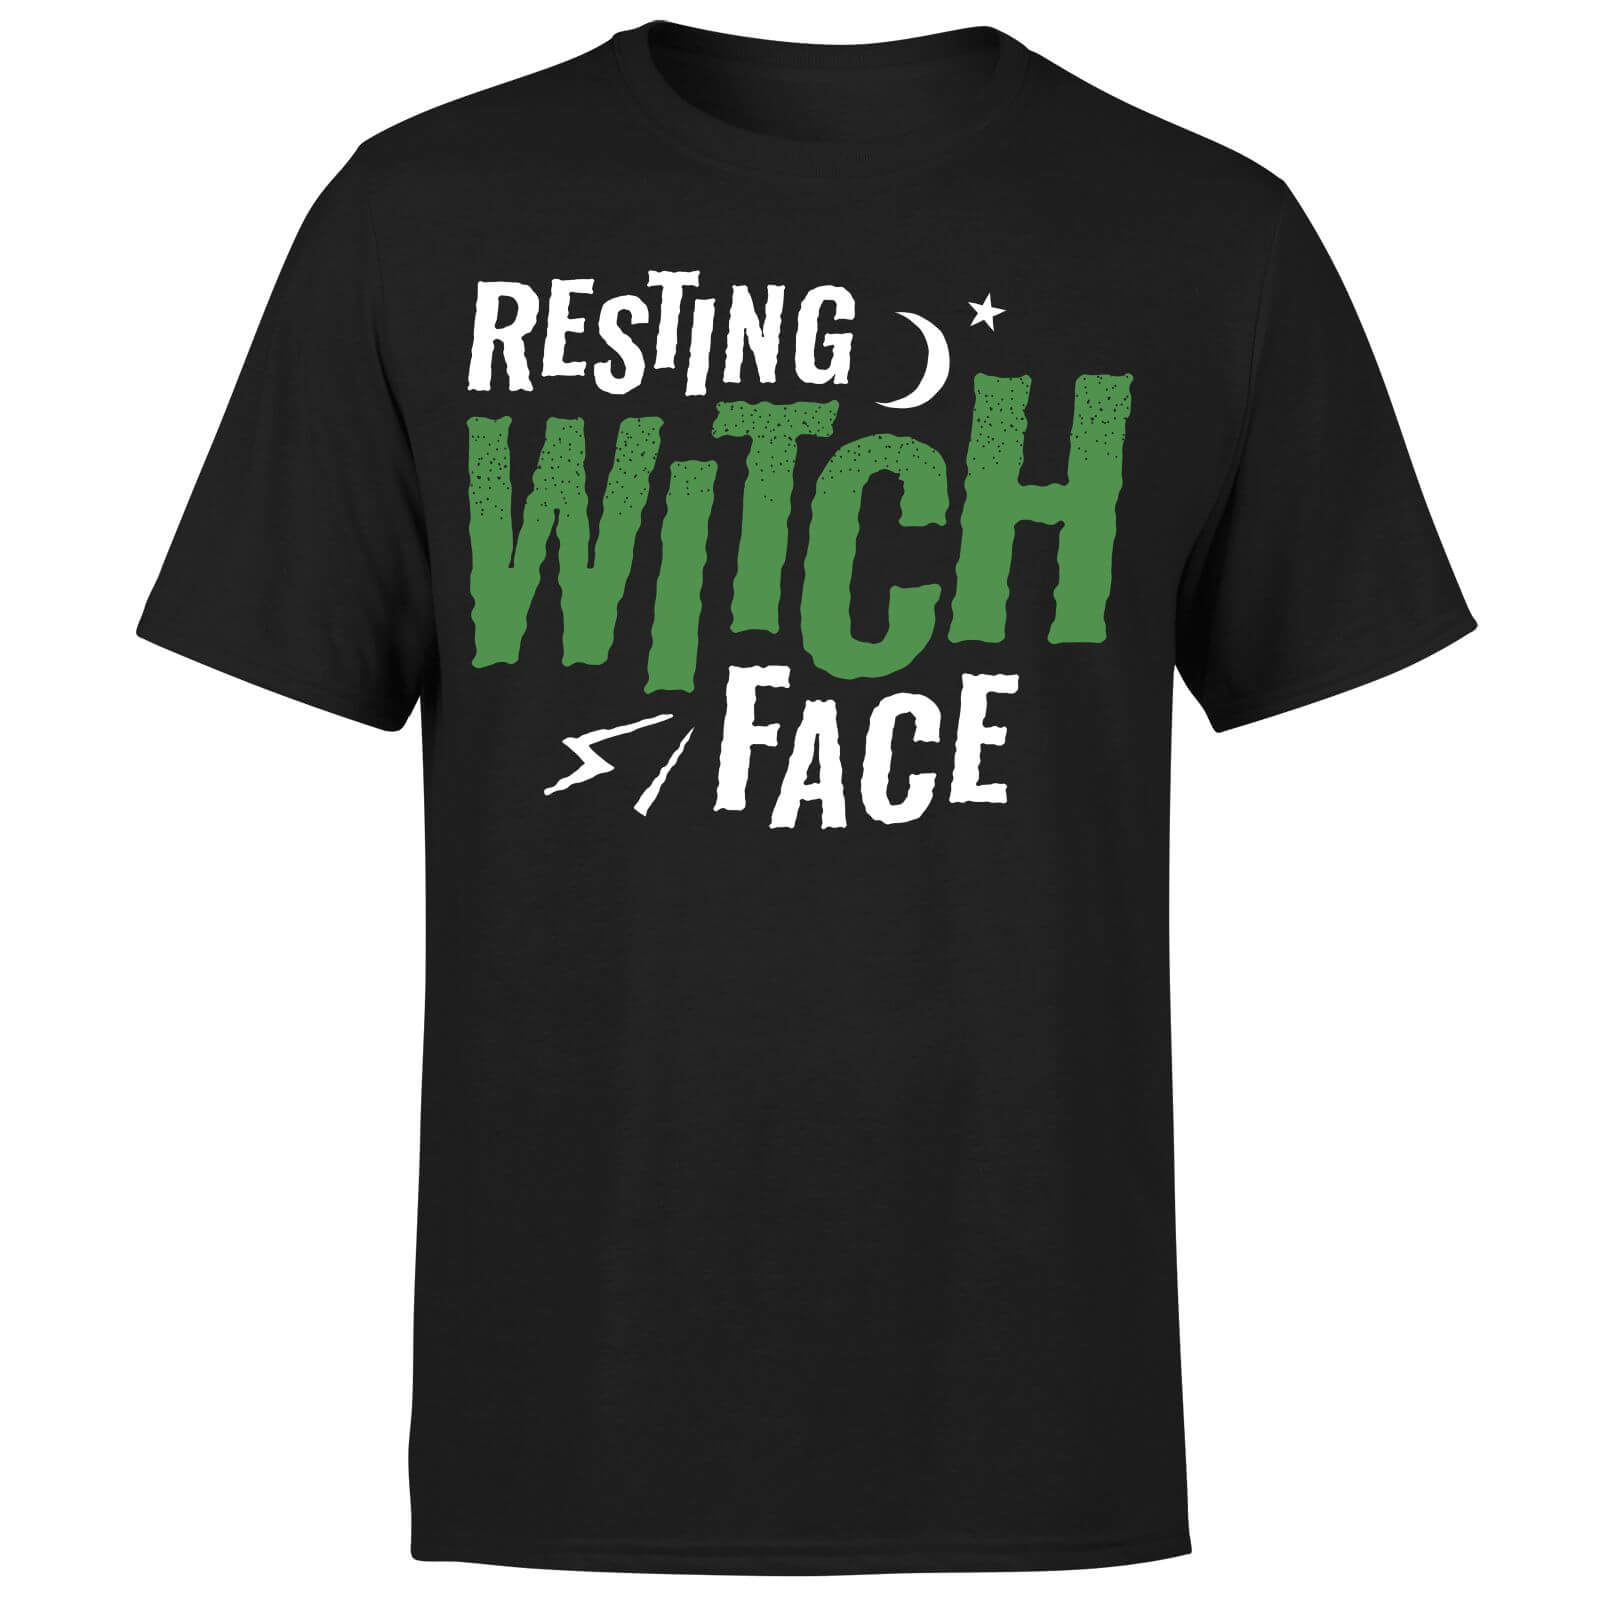 Resting Witch Face T-Shirt - Black - S - Black